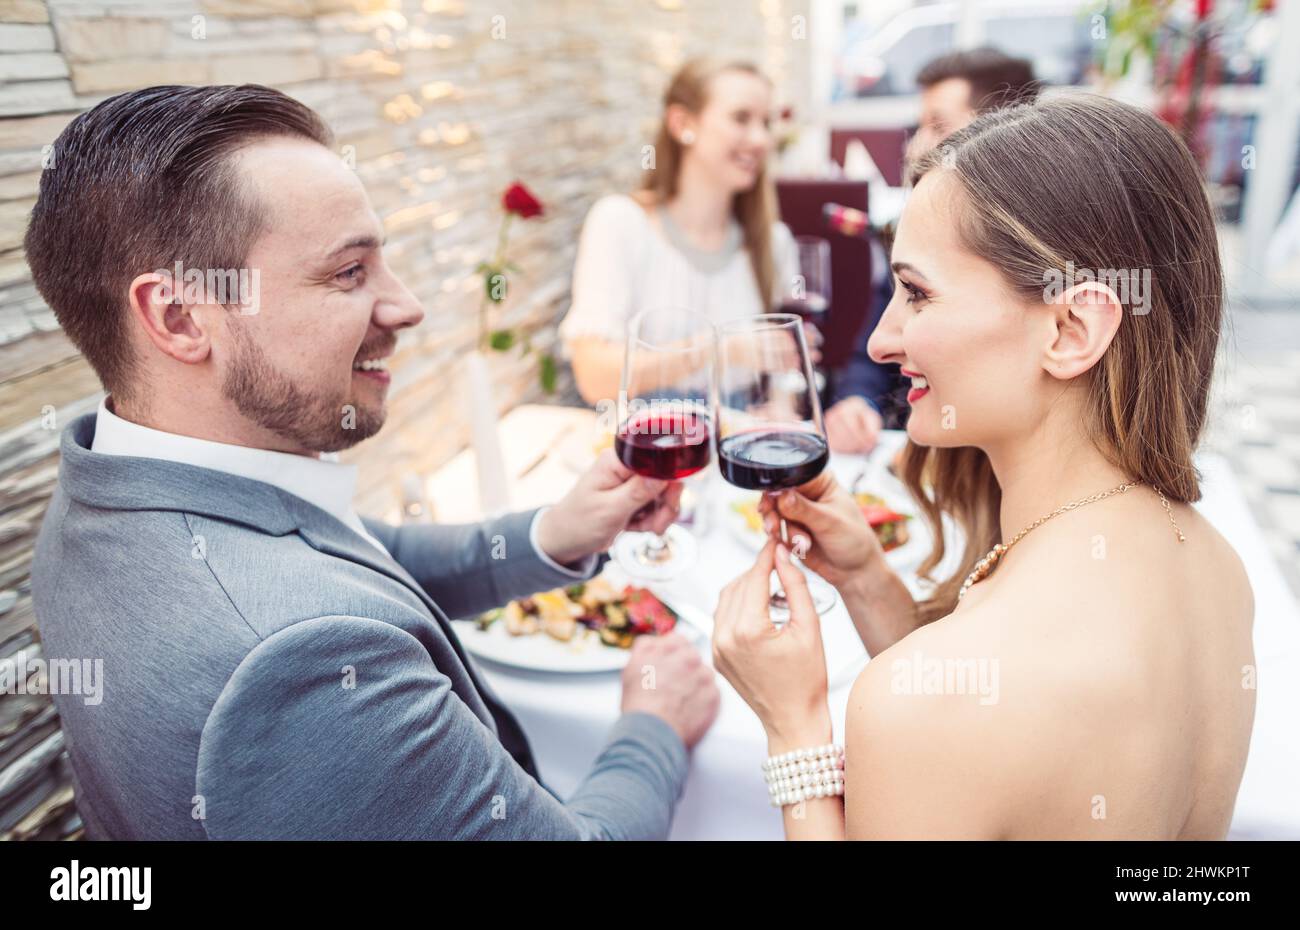 Men and women having a good time with food and drink in restaurant Stock Photo